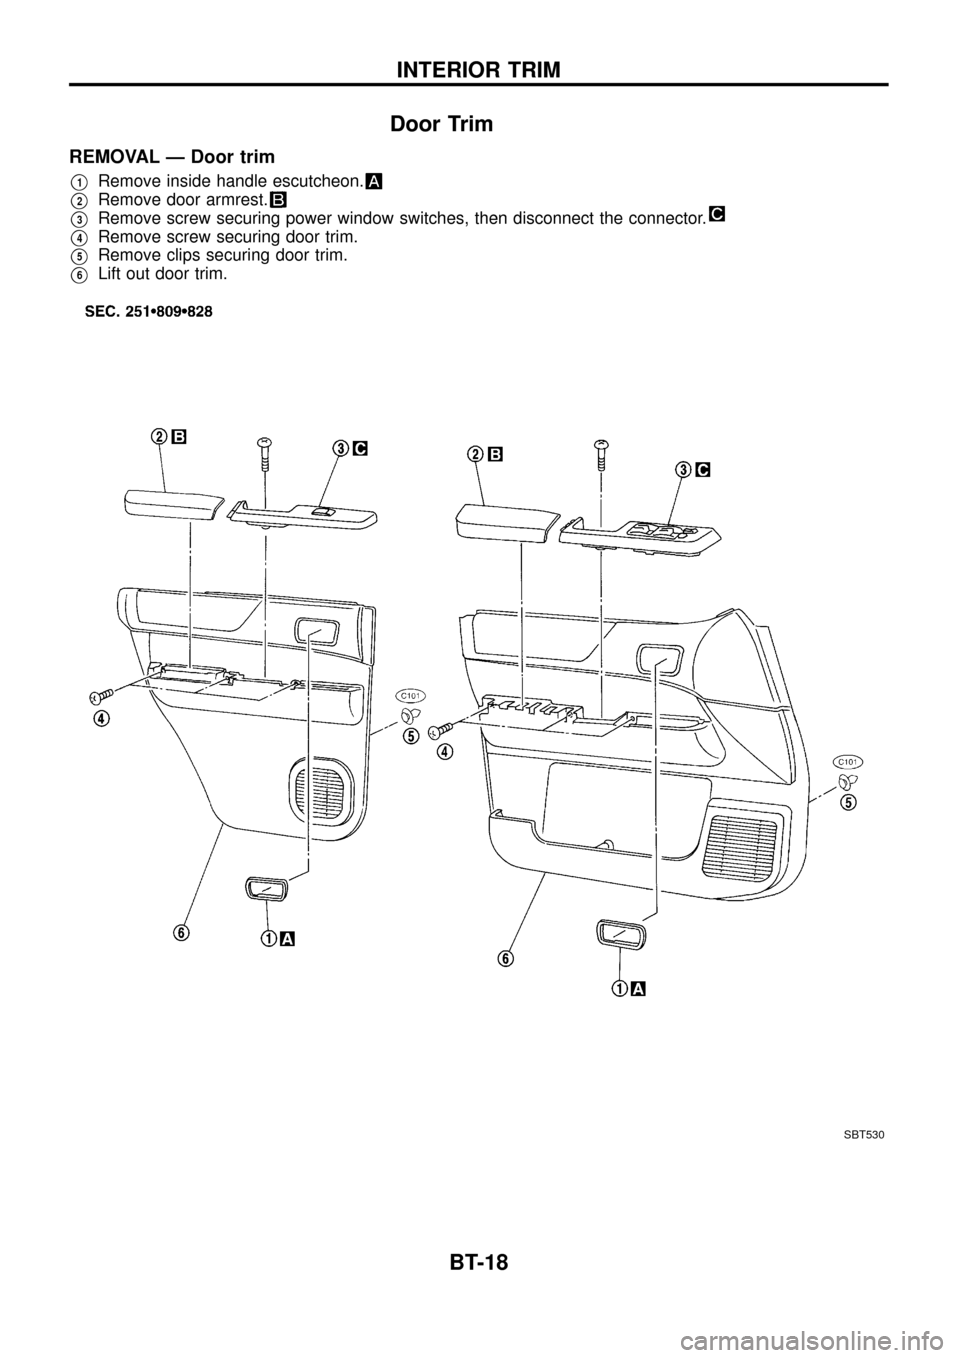 NISSAN PATROL 1998 Y61 / 5.G Body User Guide Door Trim
REMOVAL Ð Door trim
V1Remove inside handle escutcheon.
V2Remove door armrest.
V3Remove screw securing power window switches, then disconnect the connector.
V4Remove screw securing door trim